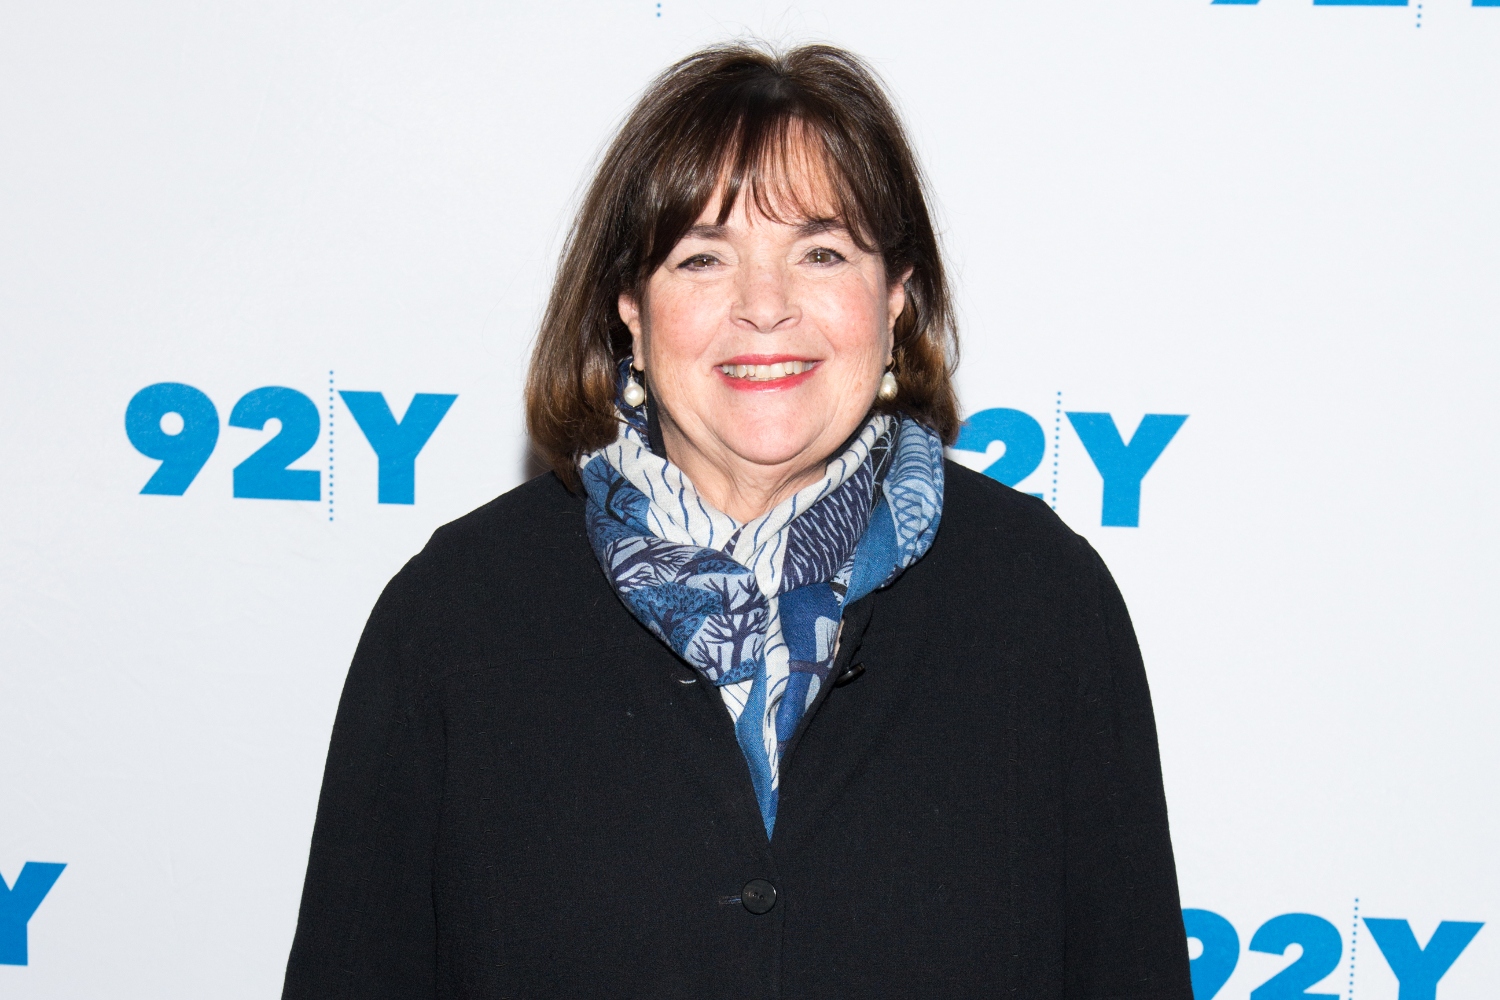 Author Ina Garten attends Ina Garten in Conversation with Danny Meyer at 92nd Street Y on January 31, 2017 in New York City.